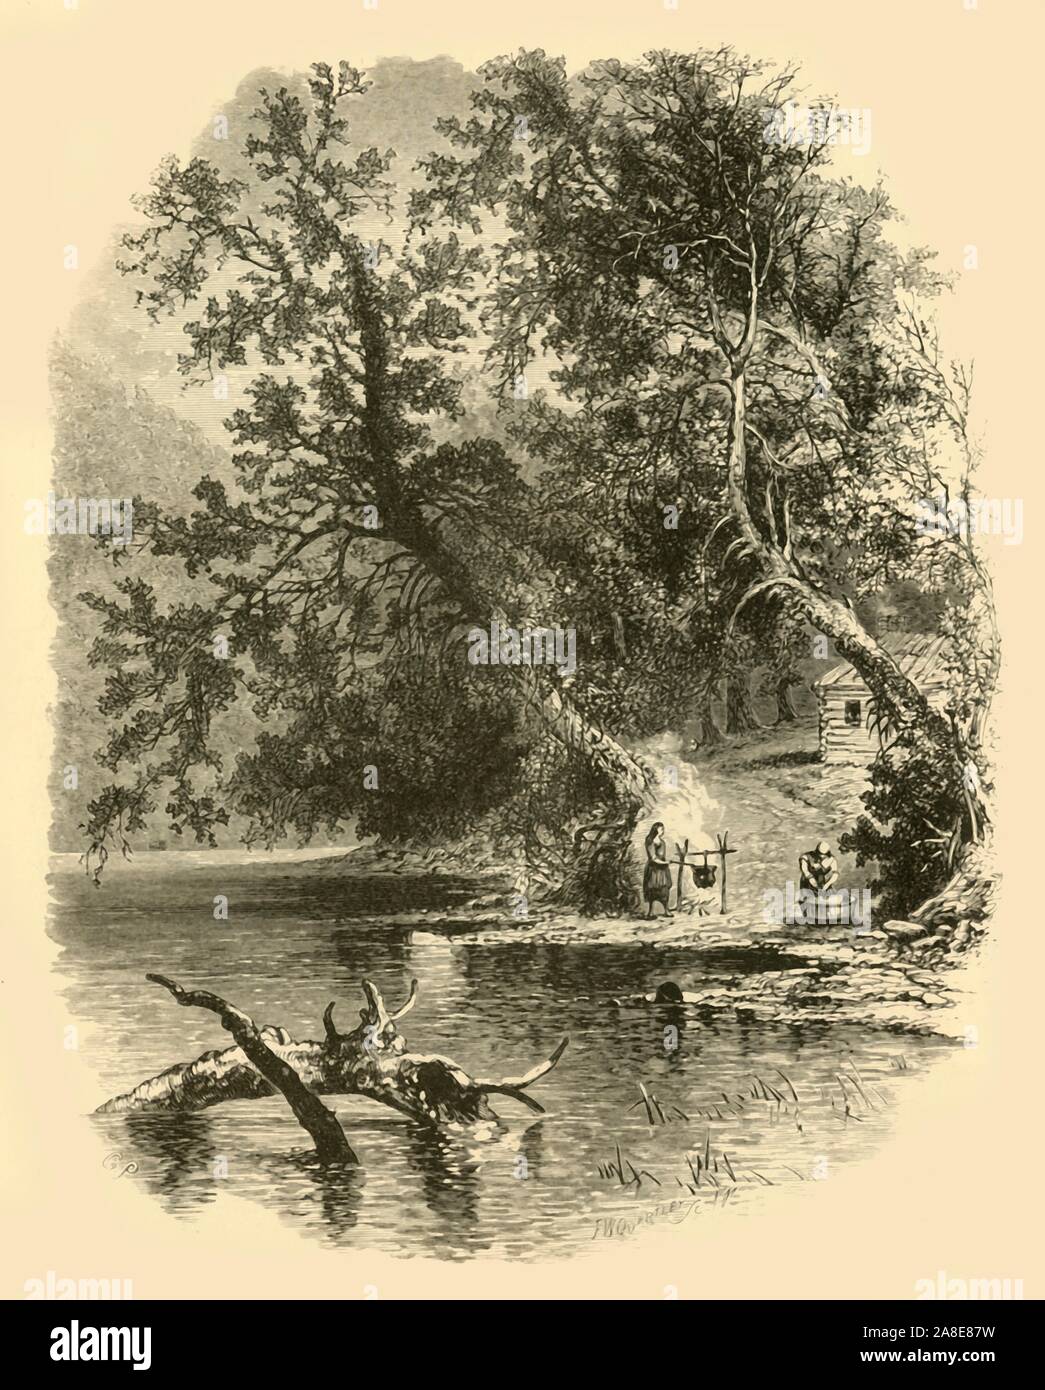 'North Branch of the Susquehanna, at Hunlocks', 1874. Scene on the North Branch of the Susquehanna River which rises in New York state, and flows through Pennsylvania and Maryland in the eastern USA. From &quot;Picturesque America; or, The Land We Live In, A Delineation by Pen and Pencil of the Mountains, Rivers, Lakes...with Illustrations on Steel and Wood by Eminent American Artists&quot; Vol. II, edited by William Cullen Bryant. [D. Appleton and Company, New York, 1874] Stock Photo